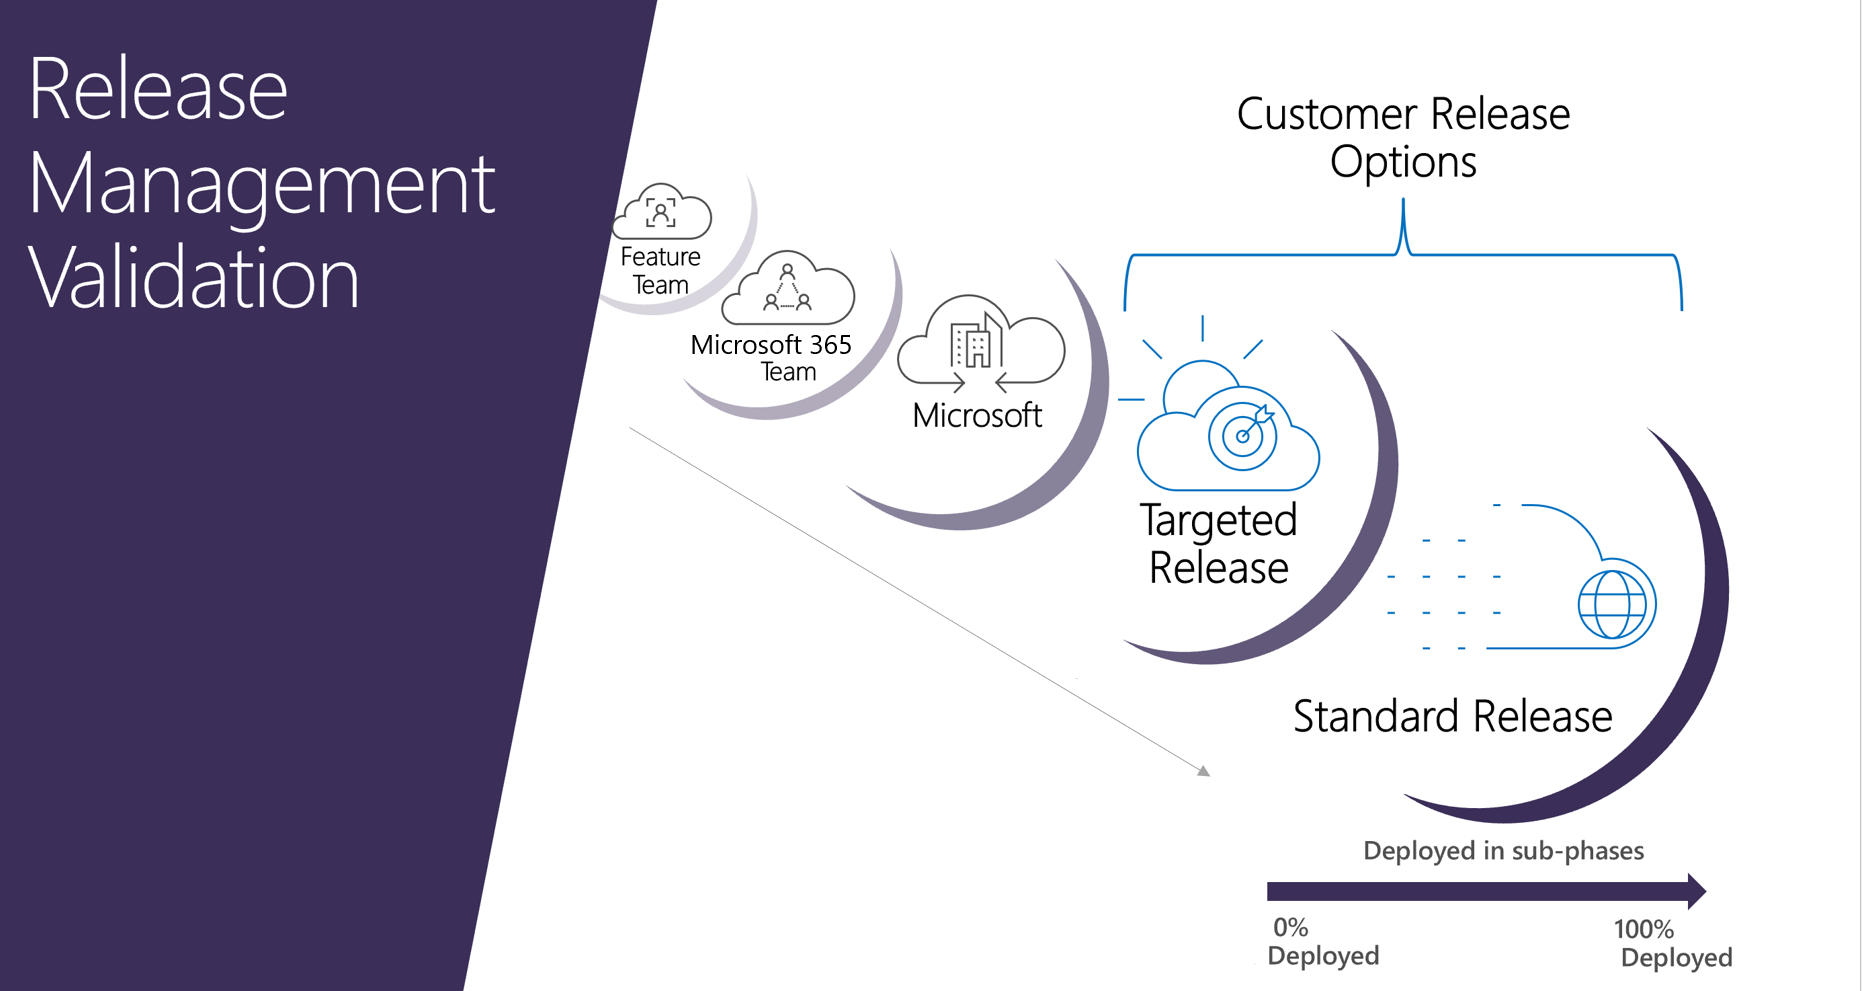 Release management validation rings for Microsoft 365.